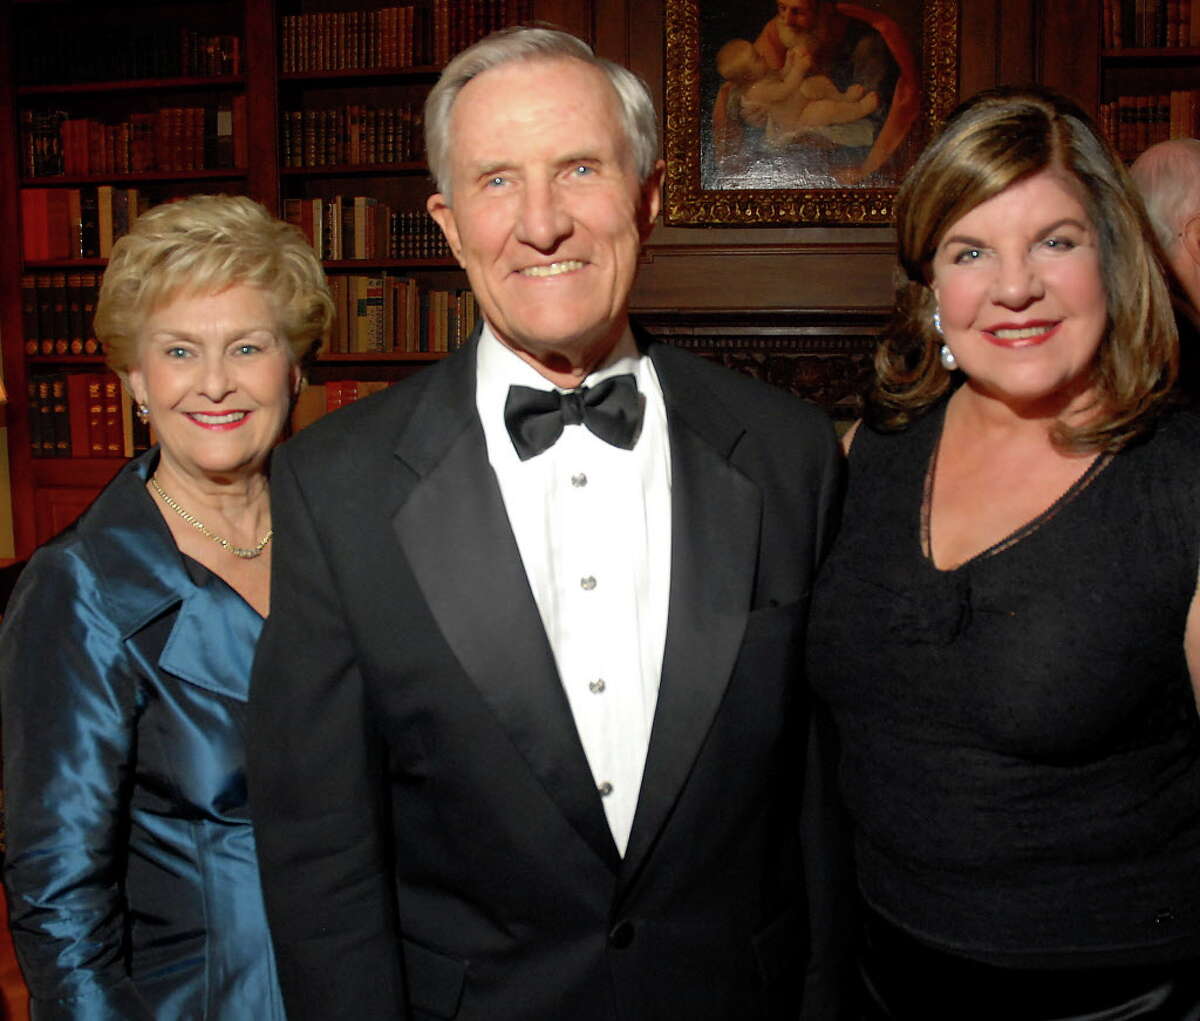 Annette and George Strake Jr. with Julia Frankel at the Rienzi Society Dinner Tuesday evening Jan. 29,2008. Strake Jr. will be attending a grand opening of the Strake-Gray Oilfield House at the Heritage Museum of Montgomery County on June 10 from 10 a.m. to noon.